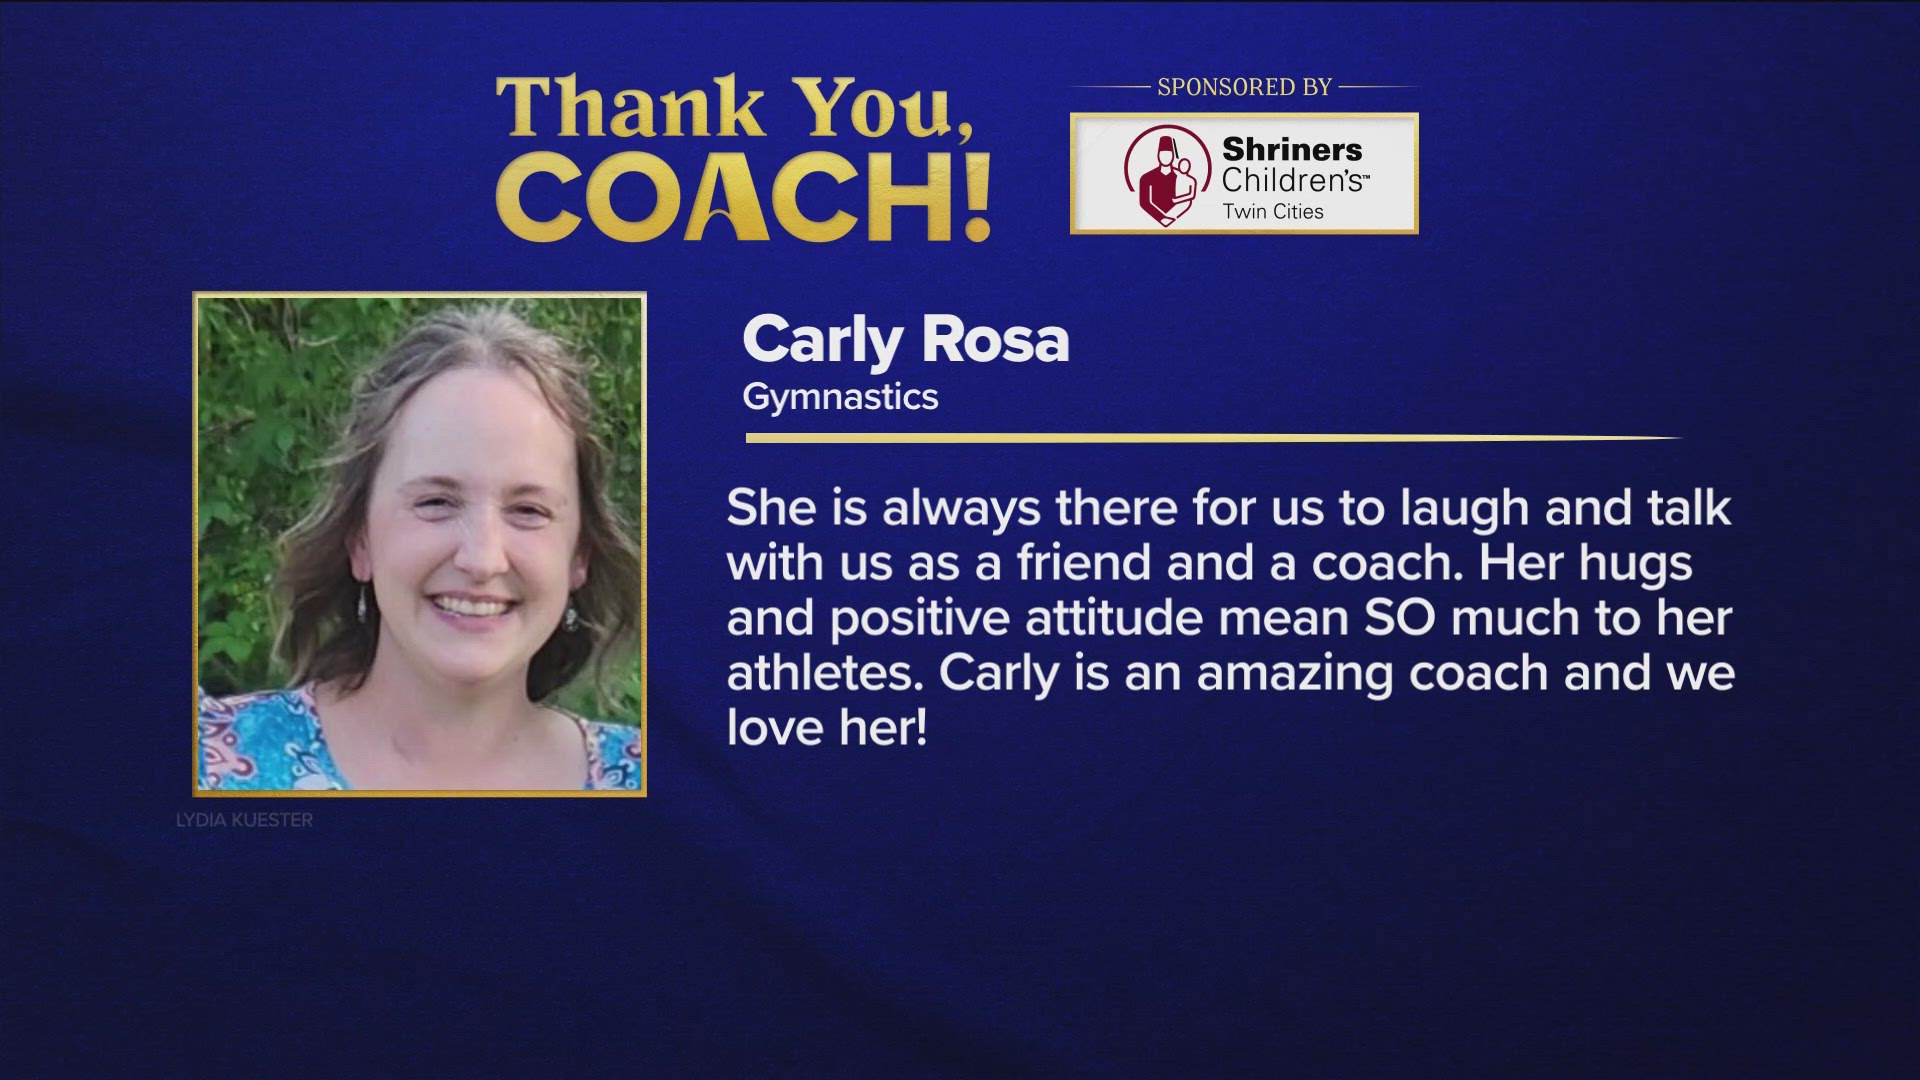 Lydia, 13, said her coach Carly Rosa has been supportive and encouraging, despite facing difficult challenges of her own.